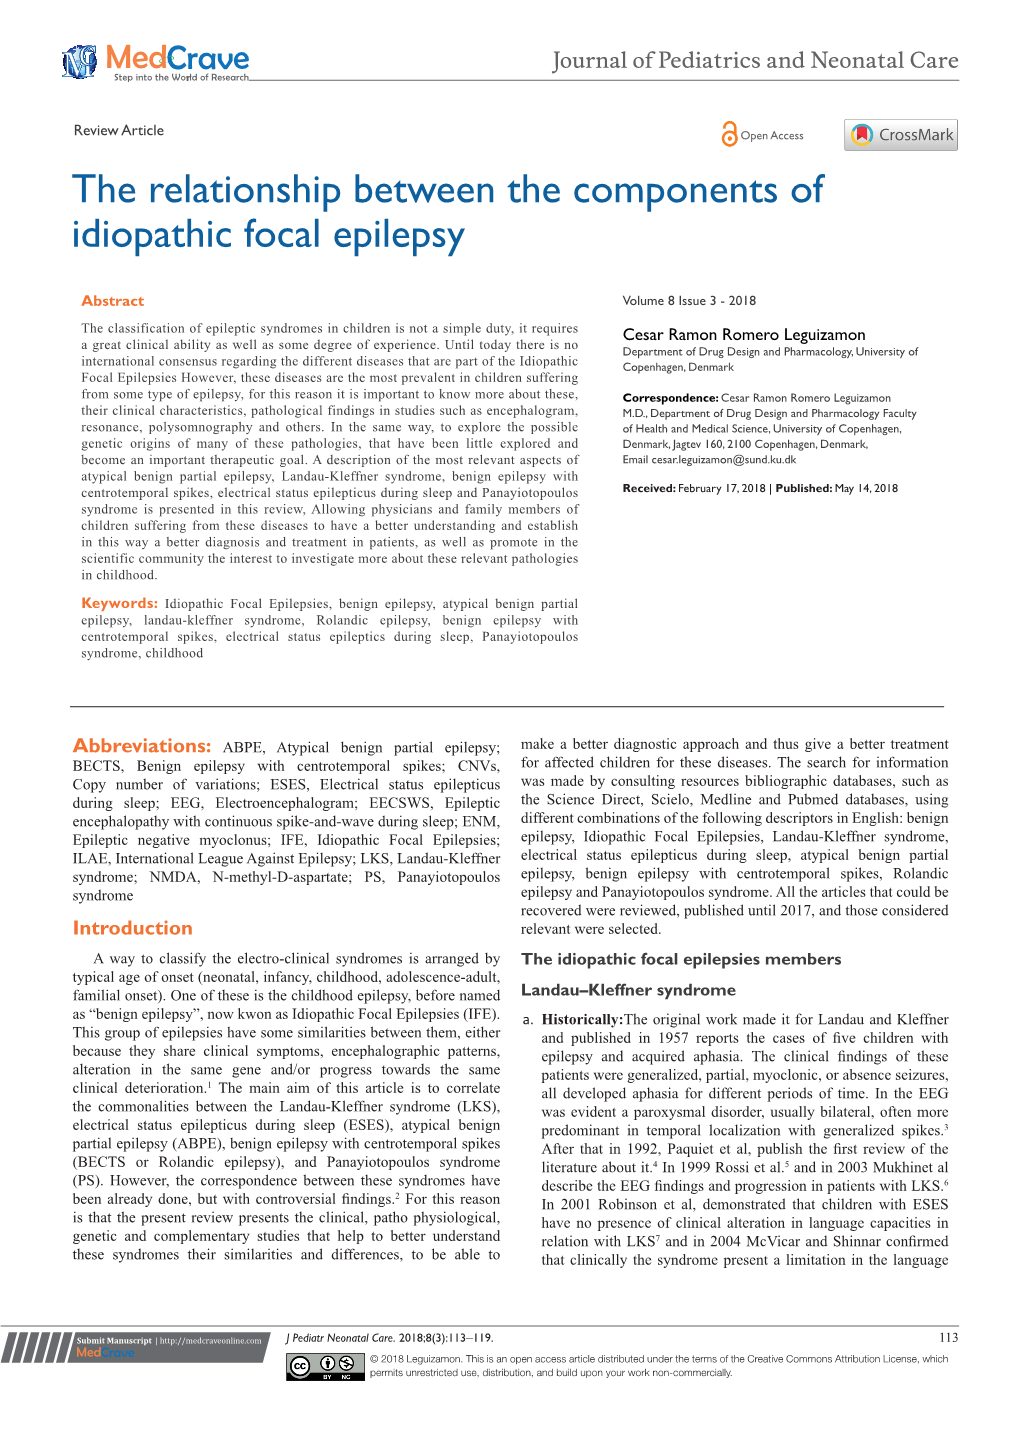 The Relationship Between the Components of Idiopathic Focal Epilepsy